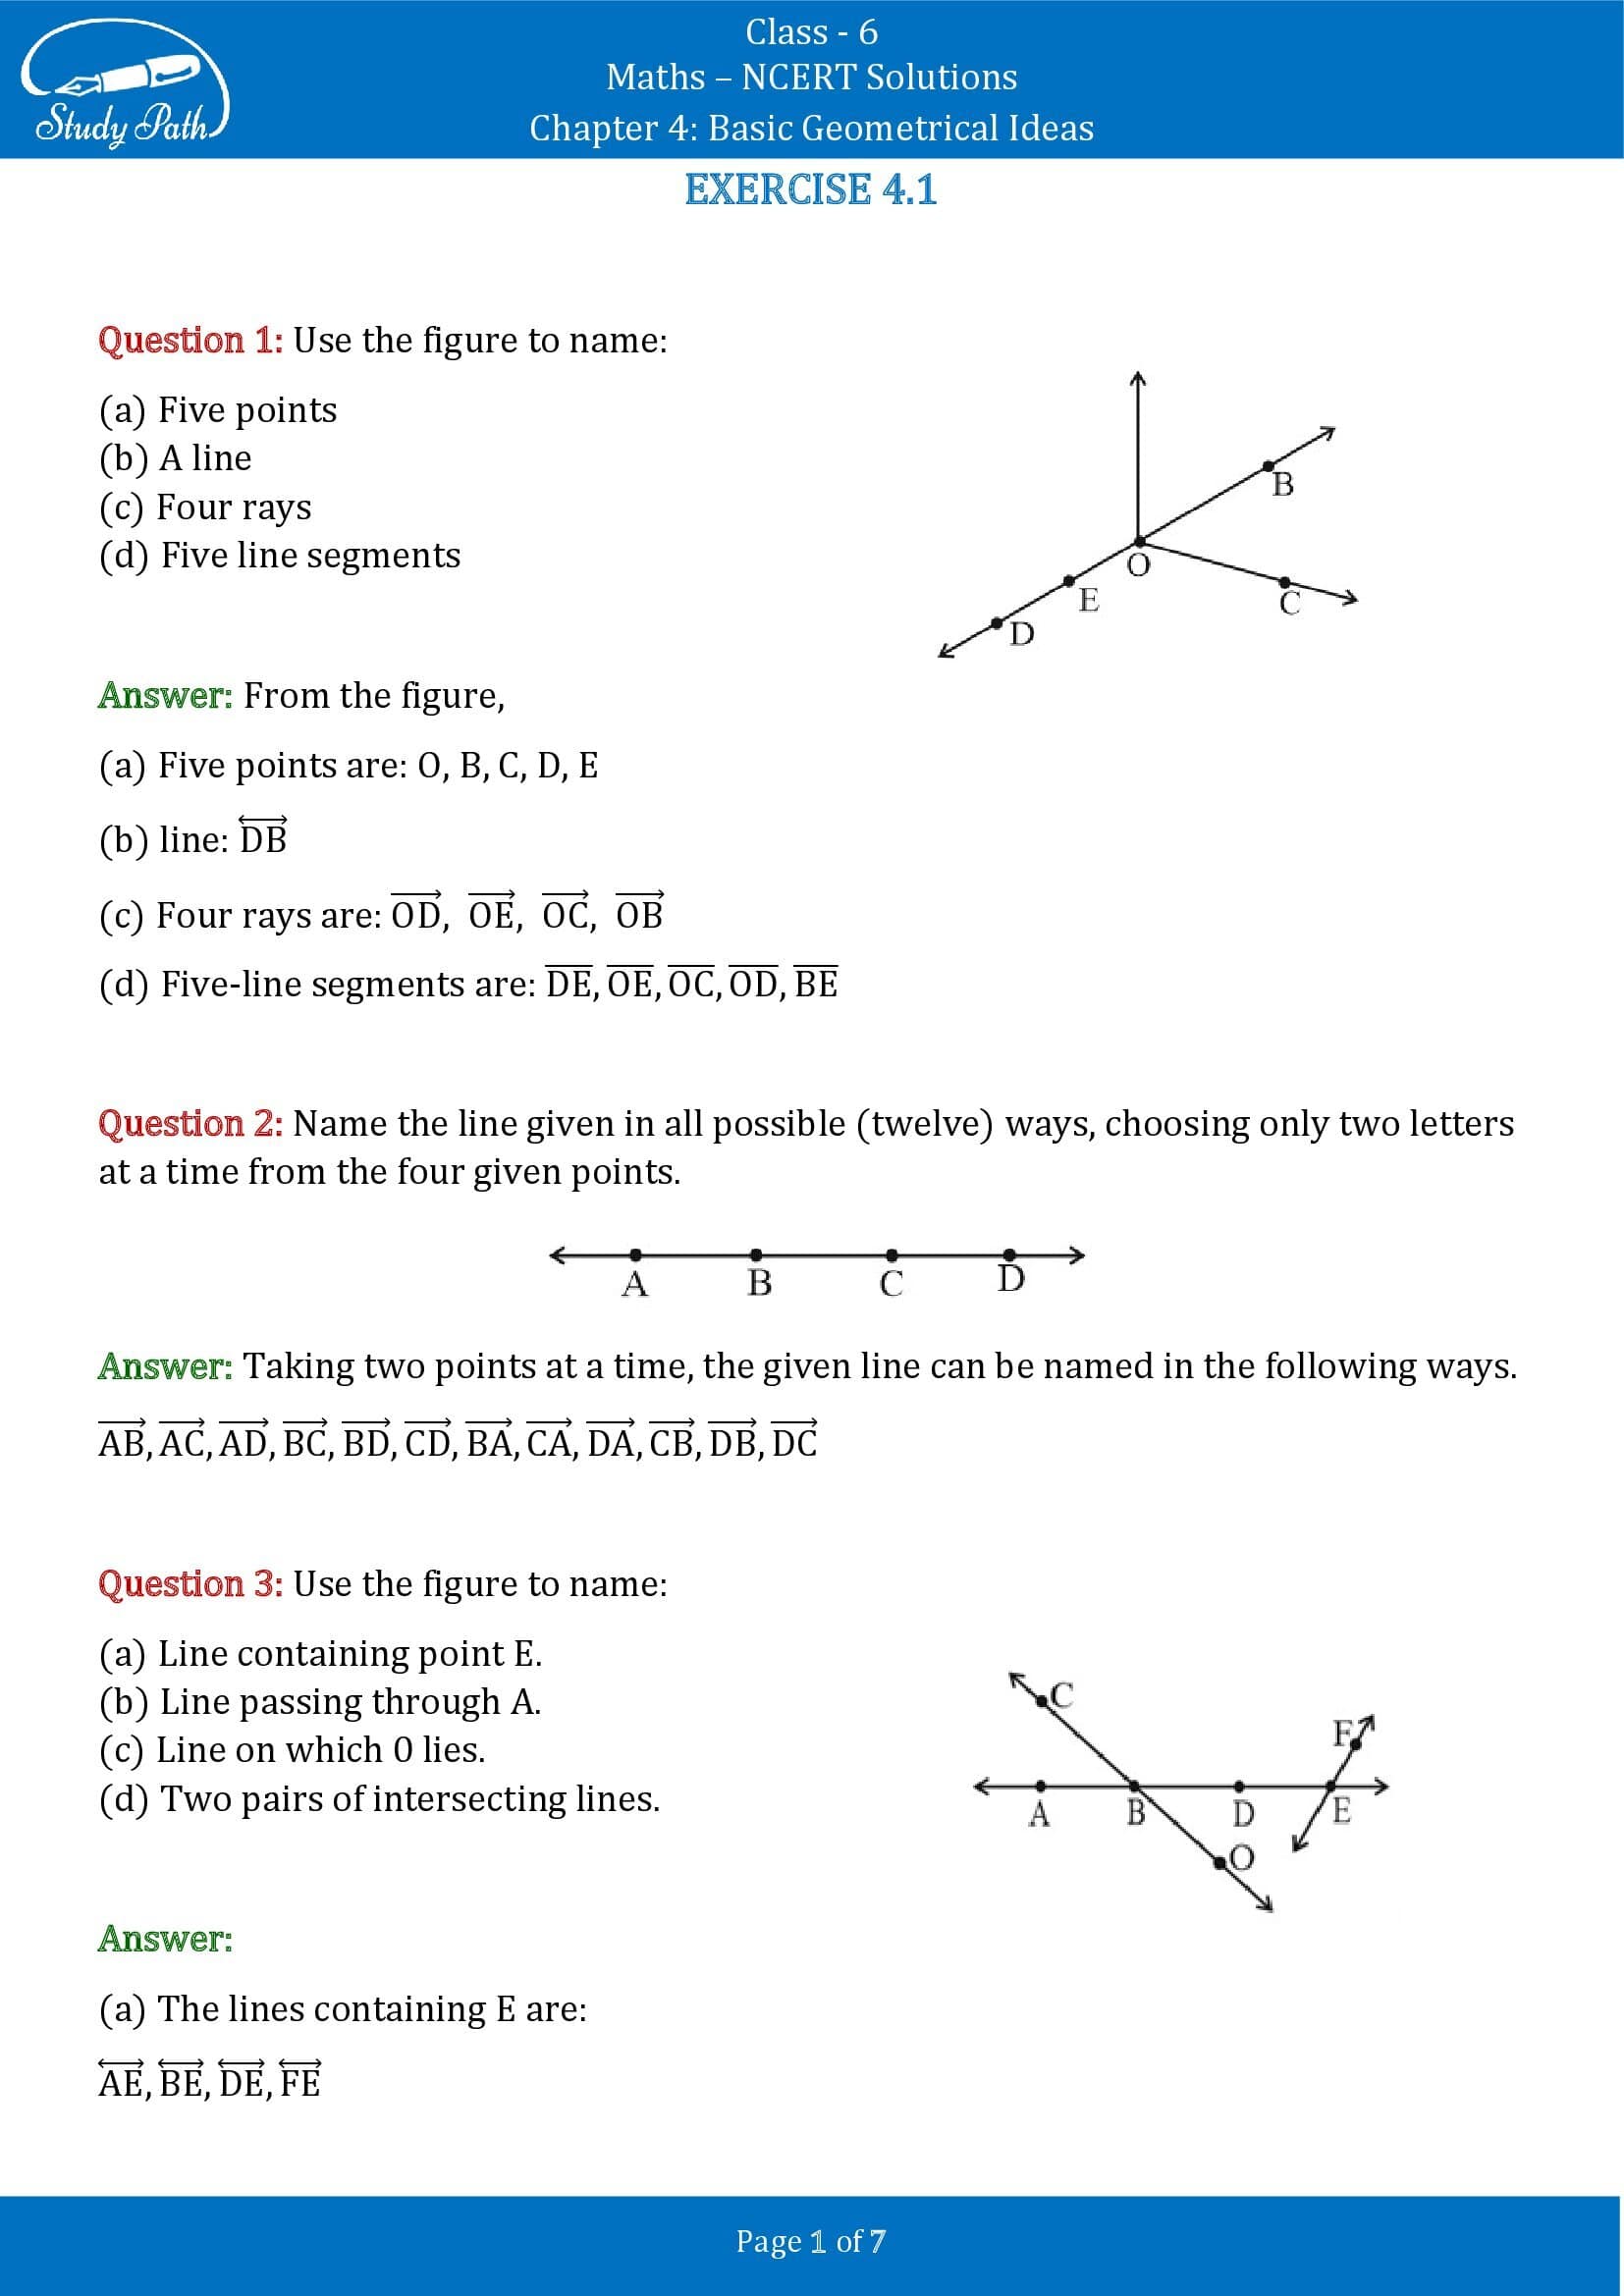 NCERT Solutions for Class 6 Maths Chapter 4 Basic Geometrical Ideas Exercise 4.1 00001